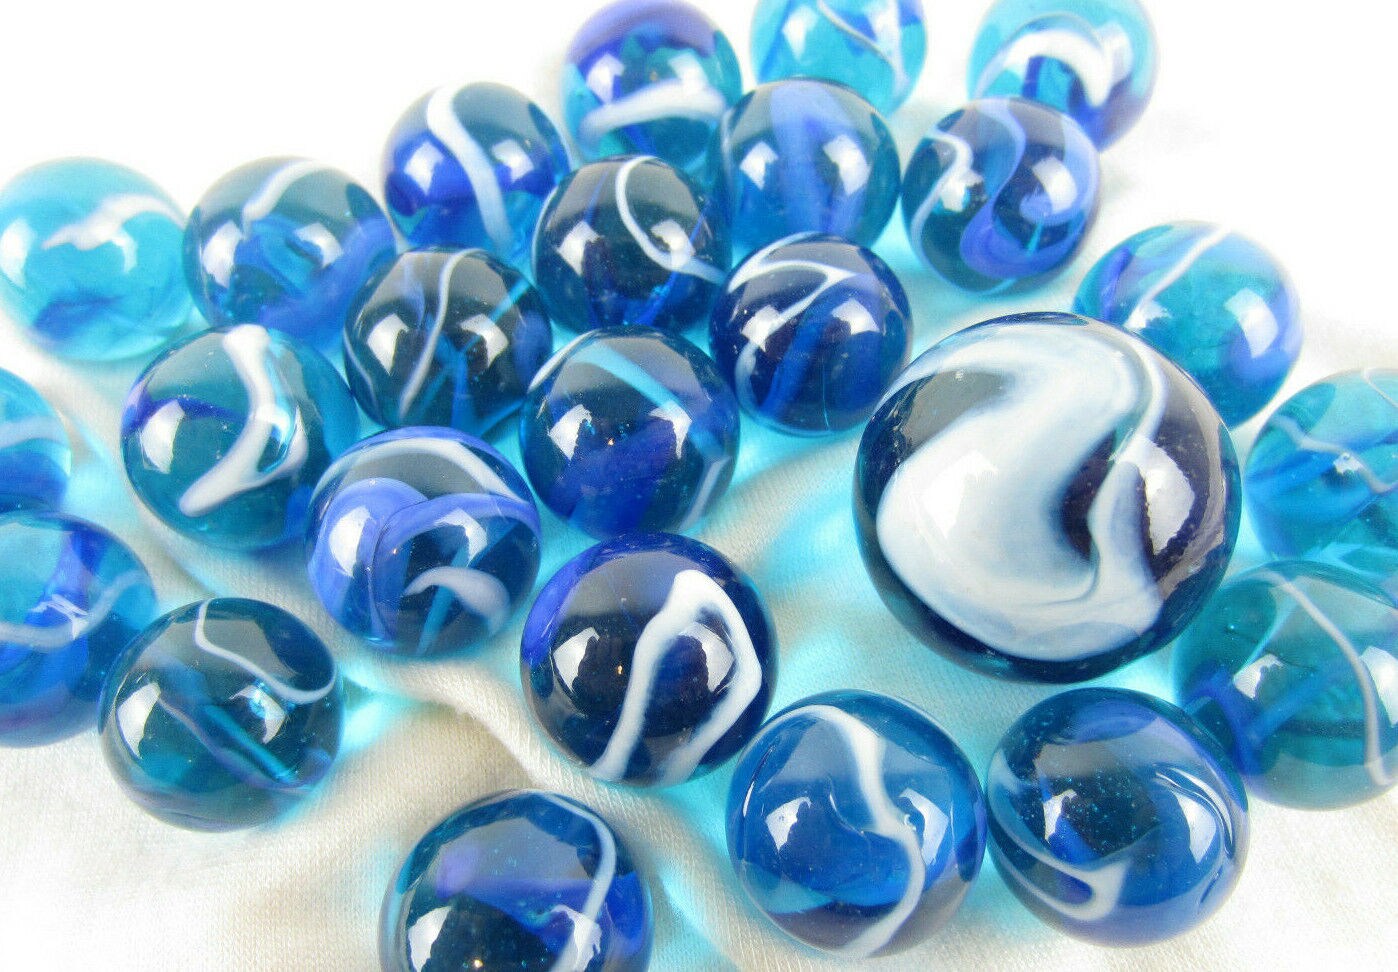 25 Glass Marbles BLUE JAY game pack vtg style Clear Translucent Shooter Swirl